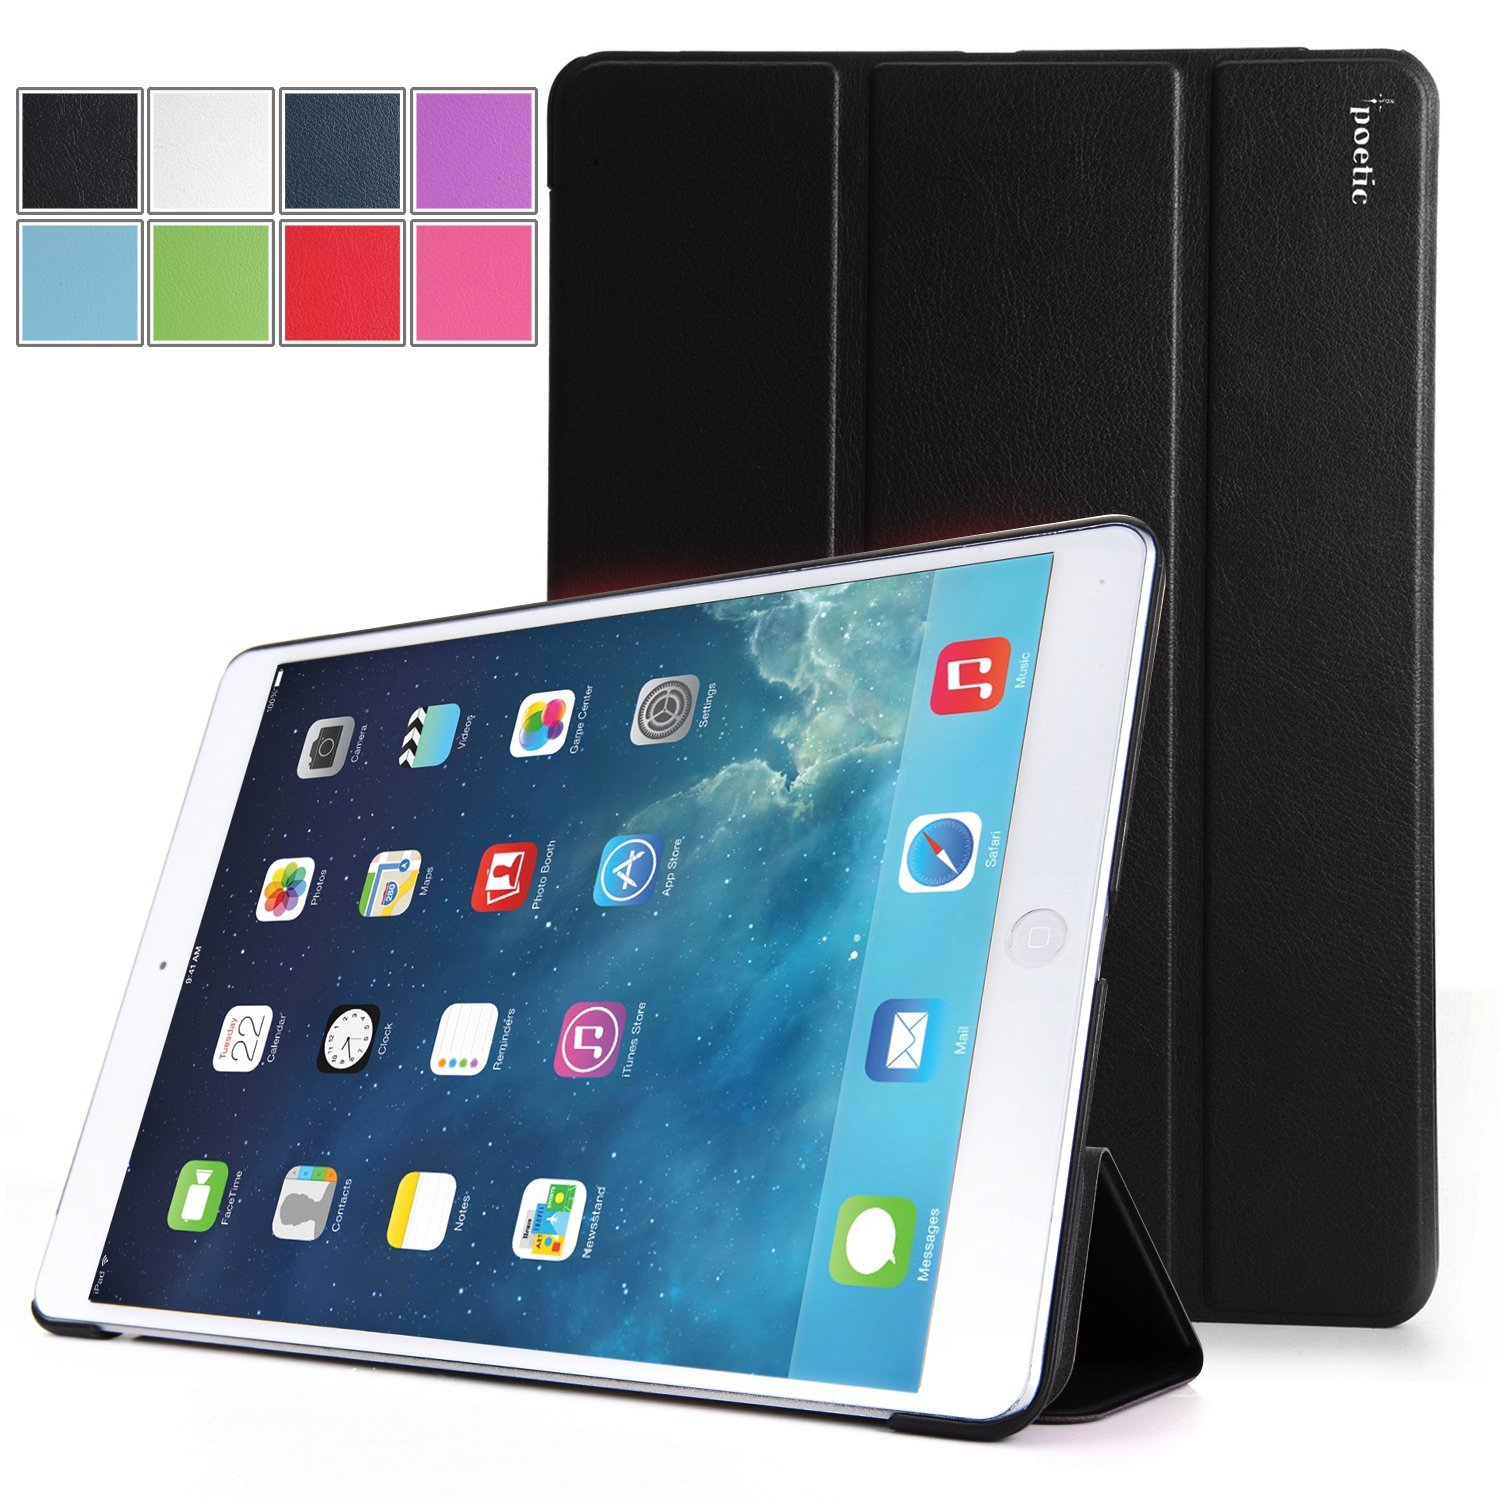 ipad air smart case review